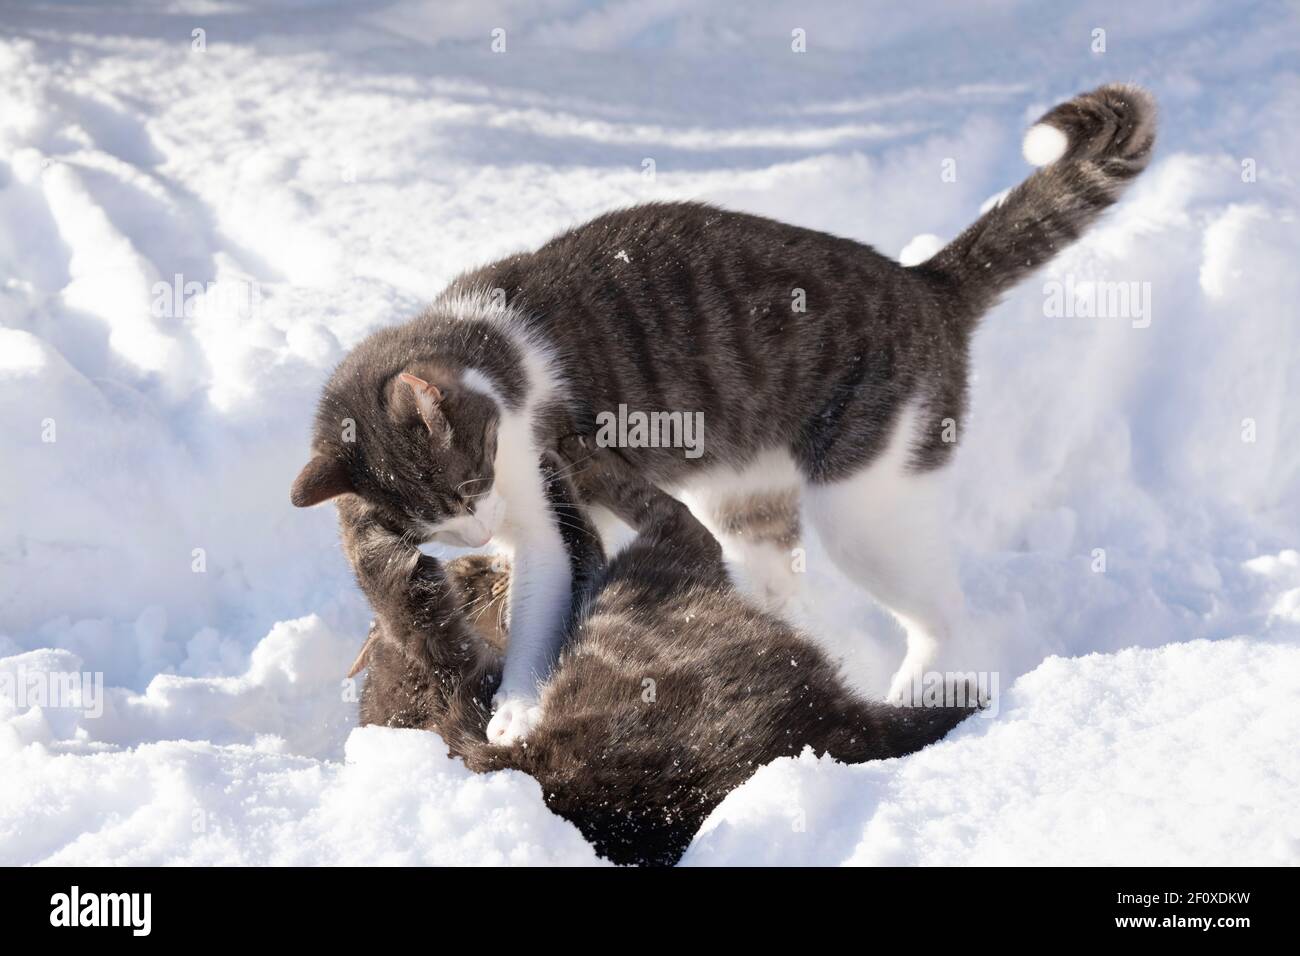 Two Pets Cats (Grey and Grey & White Tabby Cats) Play Fighting in Snow Stock Photo